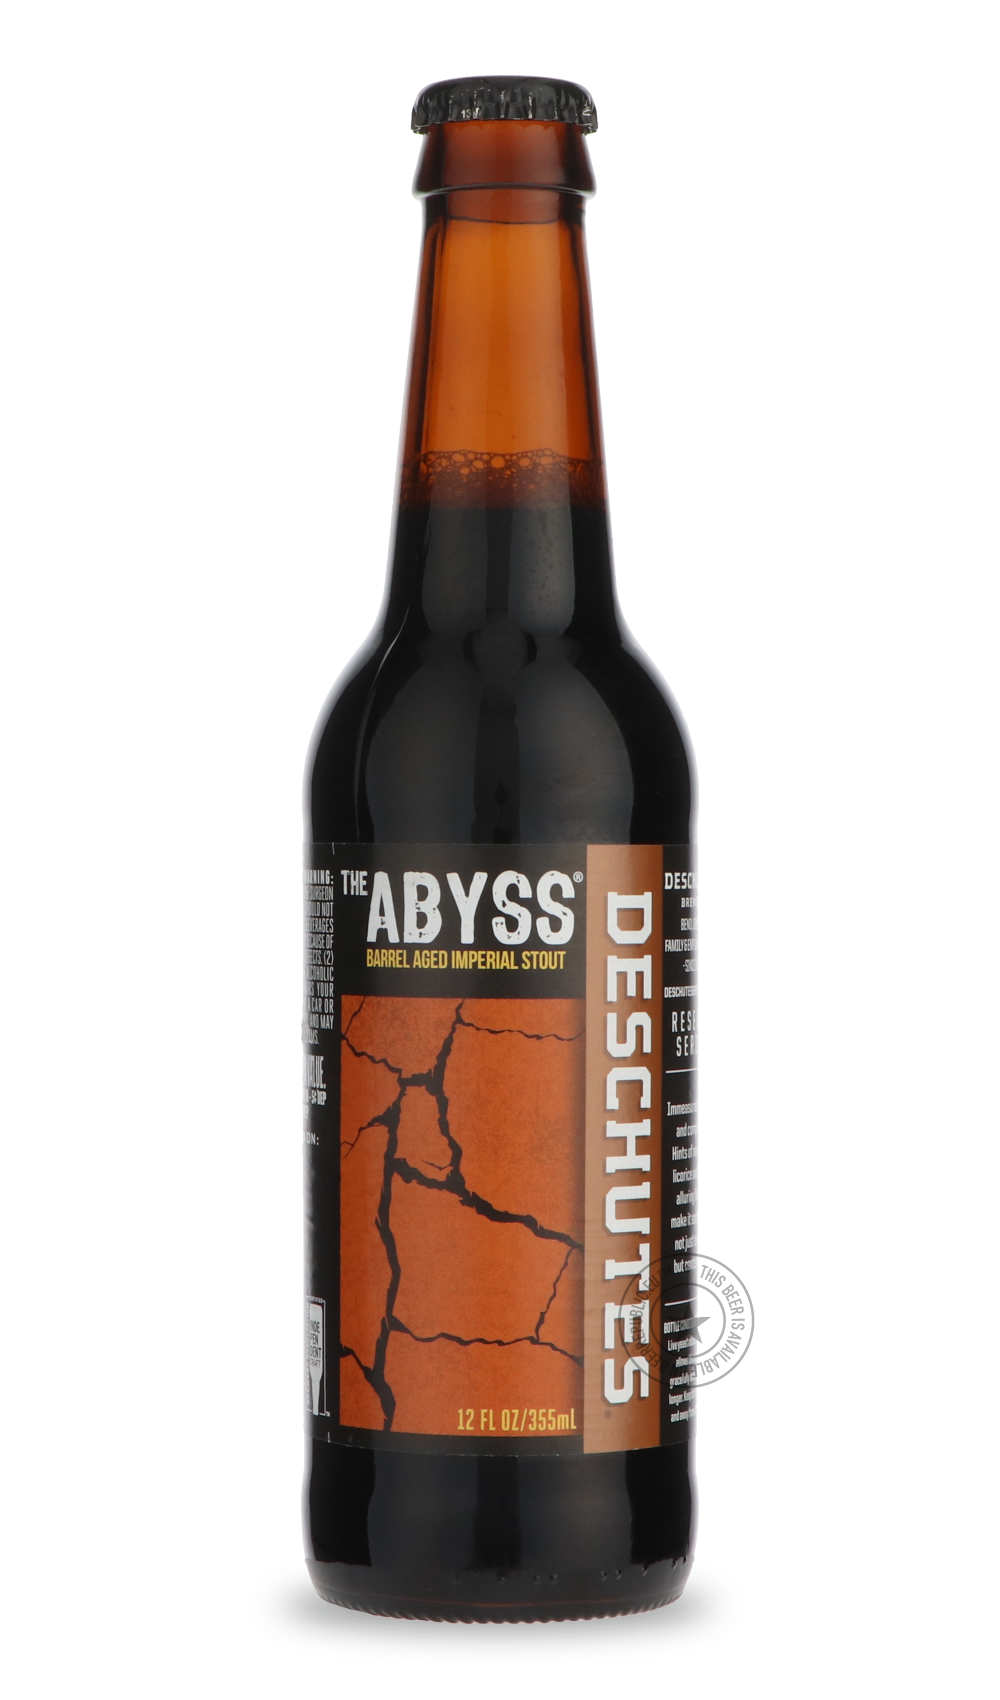 -Deschutes- The Abyss-Stout & Porter- Only @ Beer Republic - The best online beer store for American & Canadian craft beer - Buy beer online from the USA and Canada - Bier online kopen - Amerikaans bier kopen - Craft beer store - Craft beer kopen - Amerikanisch bier kaufen - Bier online kaufen - Acheter biere online - IPA - Stout - Porter - New England IPA - Hazy IPA - Imperial Stout - Barrel Aged - Barrel Aged Imperial Stout - Brown - Dark beer - Blond - Blonde - Pilsner - Lager - Wheat - Weizen - Amber - 